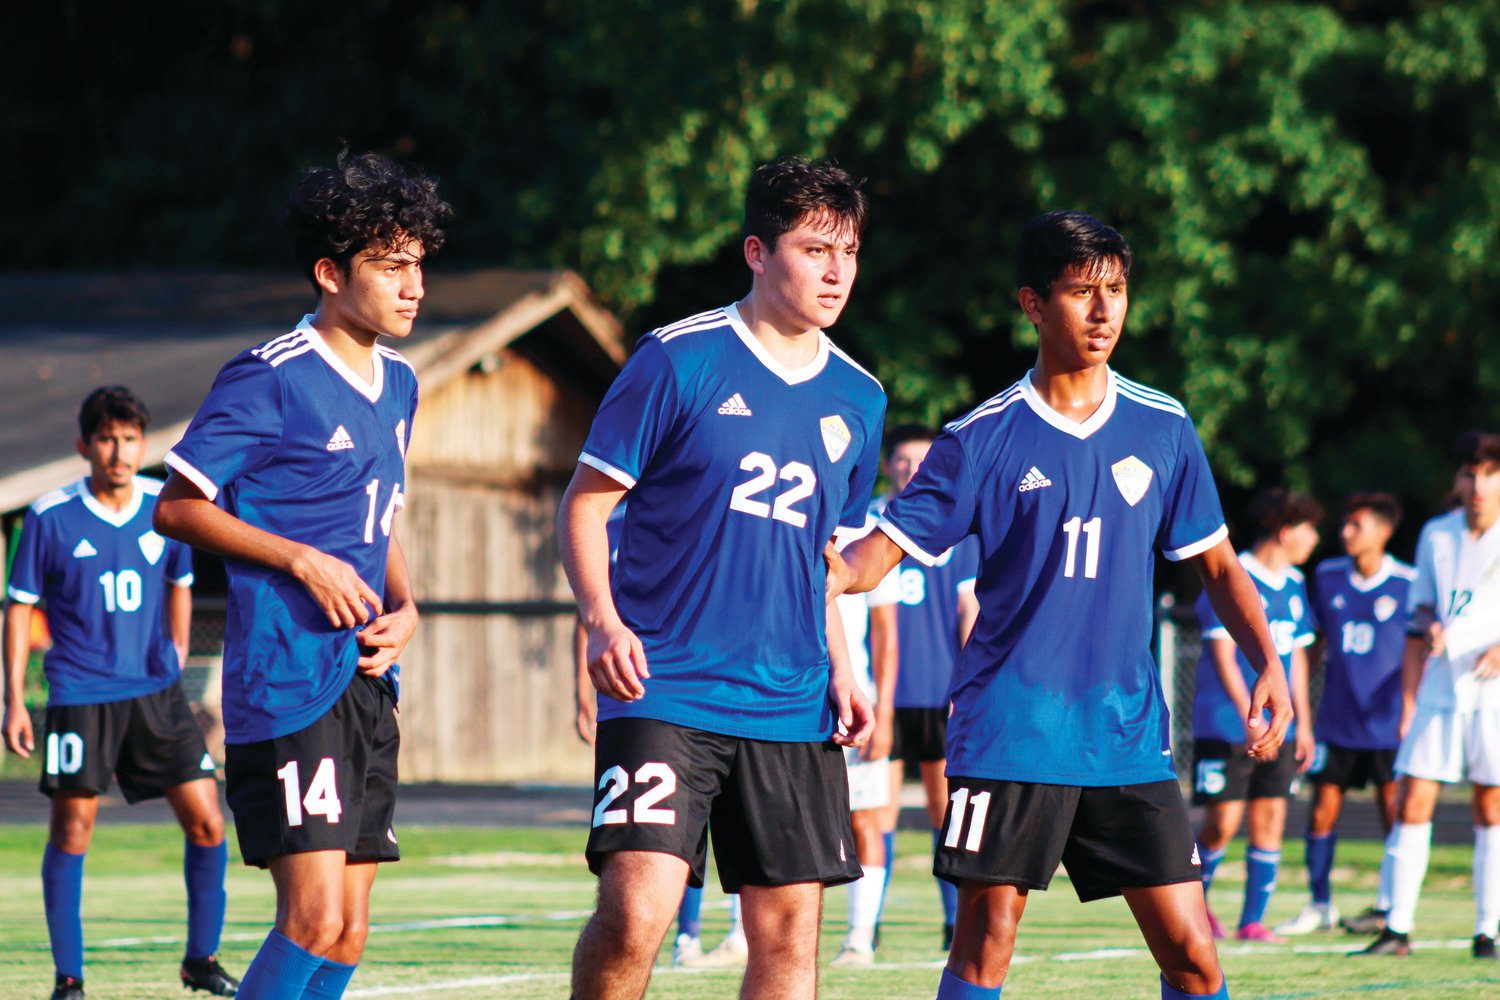 Jordan-Matthews players (from left to right: Brian Hernandez (10), Anthony Rodriguez, Irvin Campos, Armando Rocha (11)) prepare their defense in the Jets' 4-1 season-opening win over the Chargers last Thursday in Siler City.